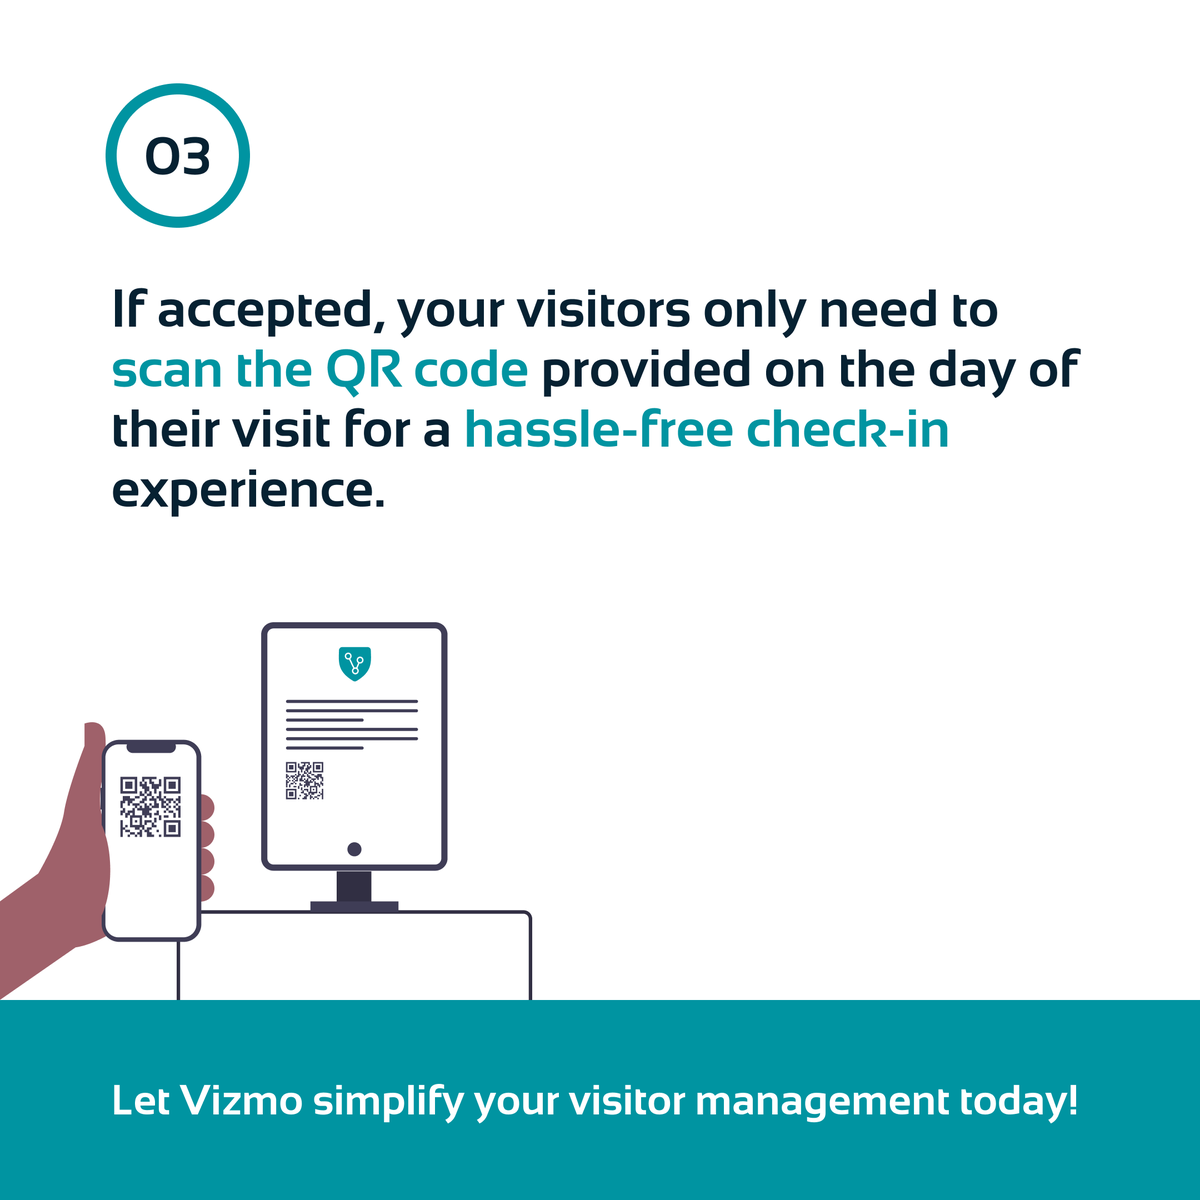 Get a step-by-step guide on managing different visitor types with Vizmo! In Part 1 of our series, learn how to effectively manage invited visitors with our easy-to-use self-check-in process. For more information, visit zurl.co/hyUv #VisitorManagementSystem #VMS